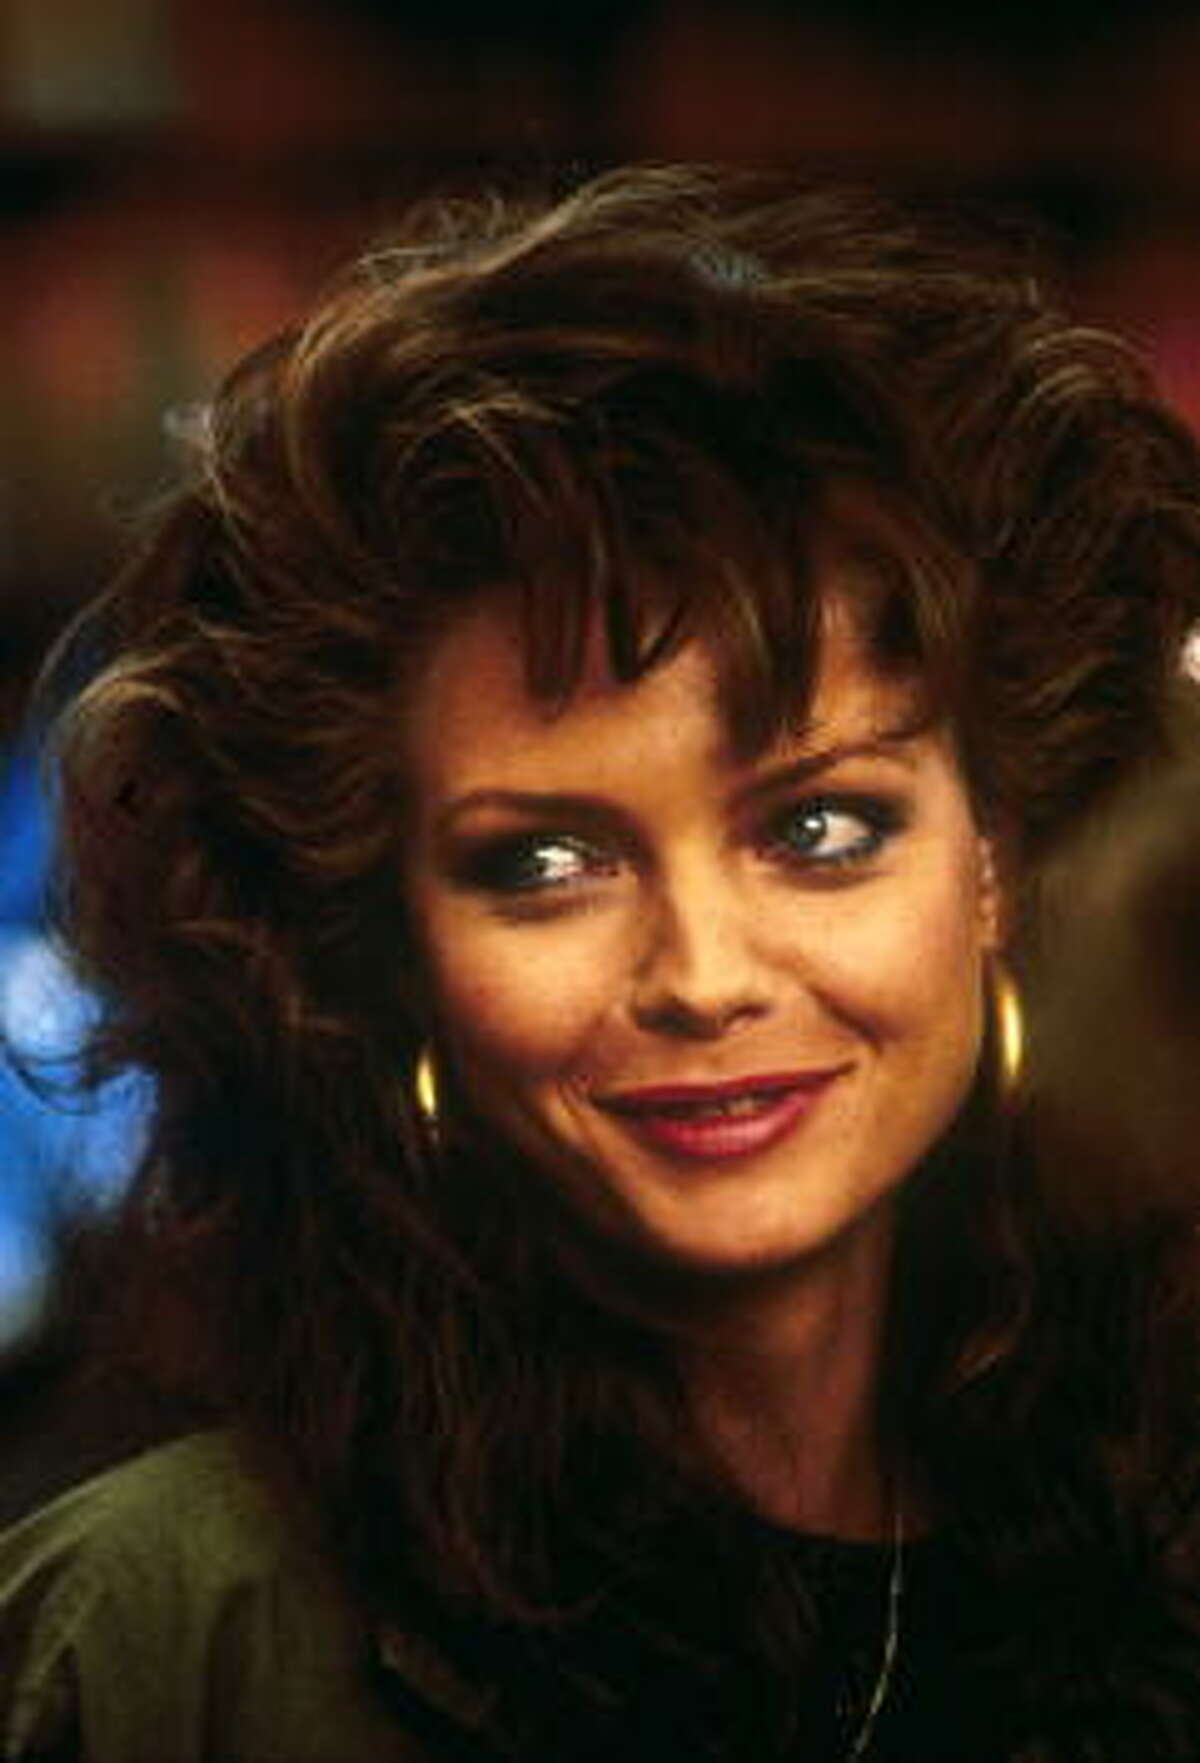 Michelle Pfeiffer was a California beauty queen before making her film debut in the ‘80s, with “Scarface,” “The Fabulous Baker Boys” and “Married to the Mob” (pictured).